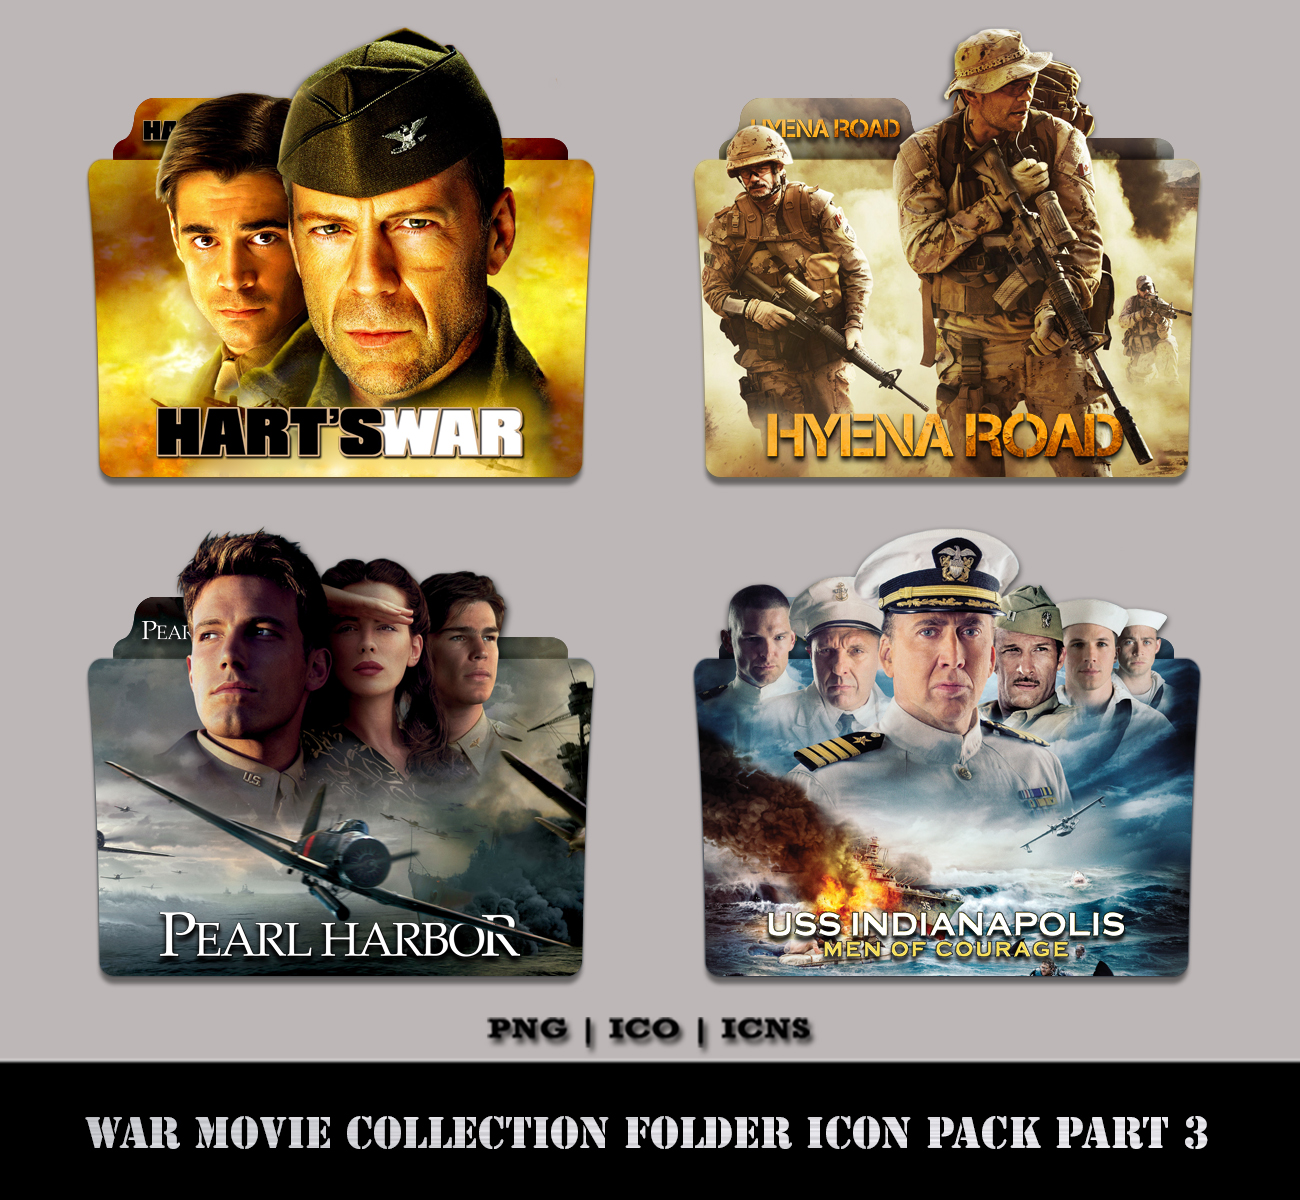 War Movie Collection Folder Icon Pack Part 3 by Bl4CKSL4YER on